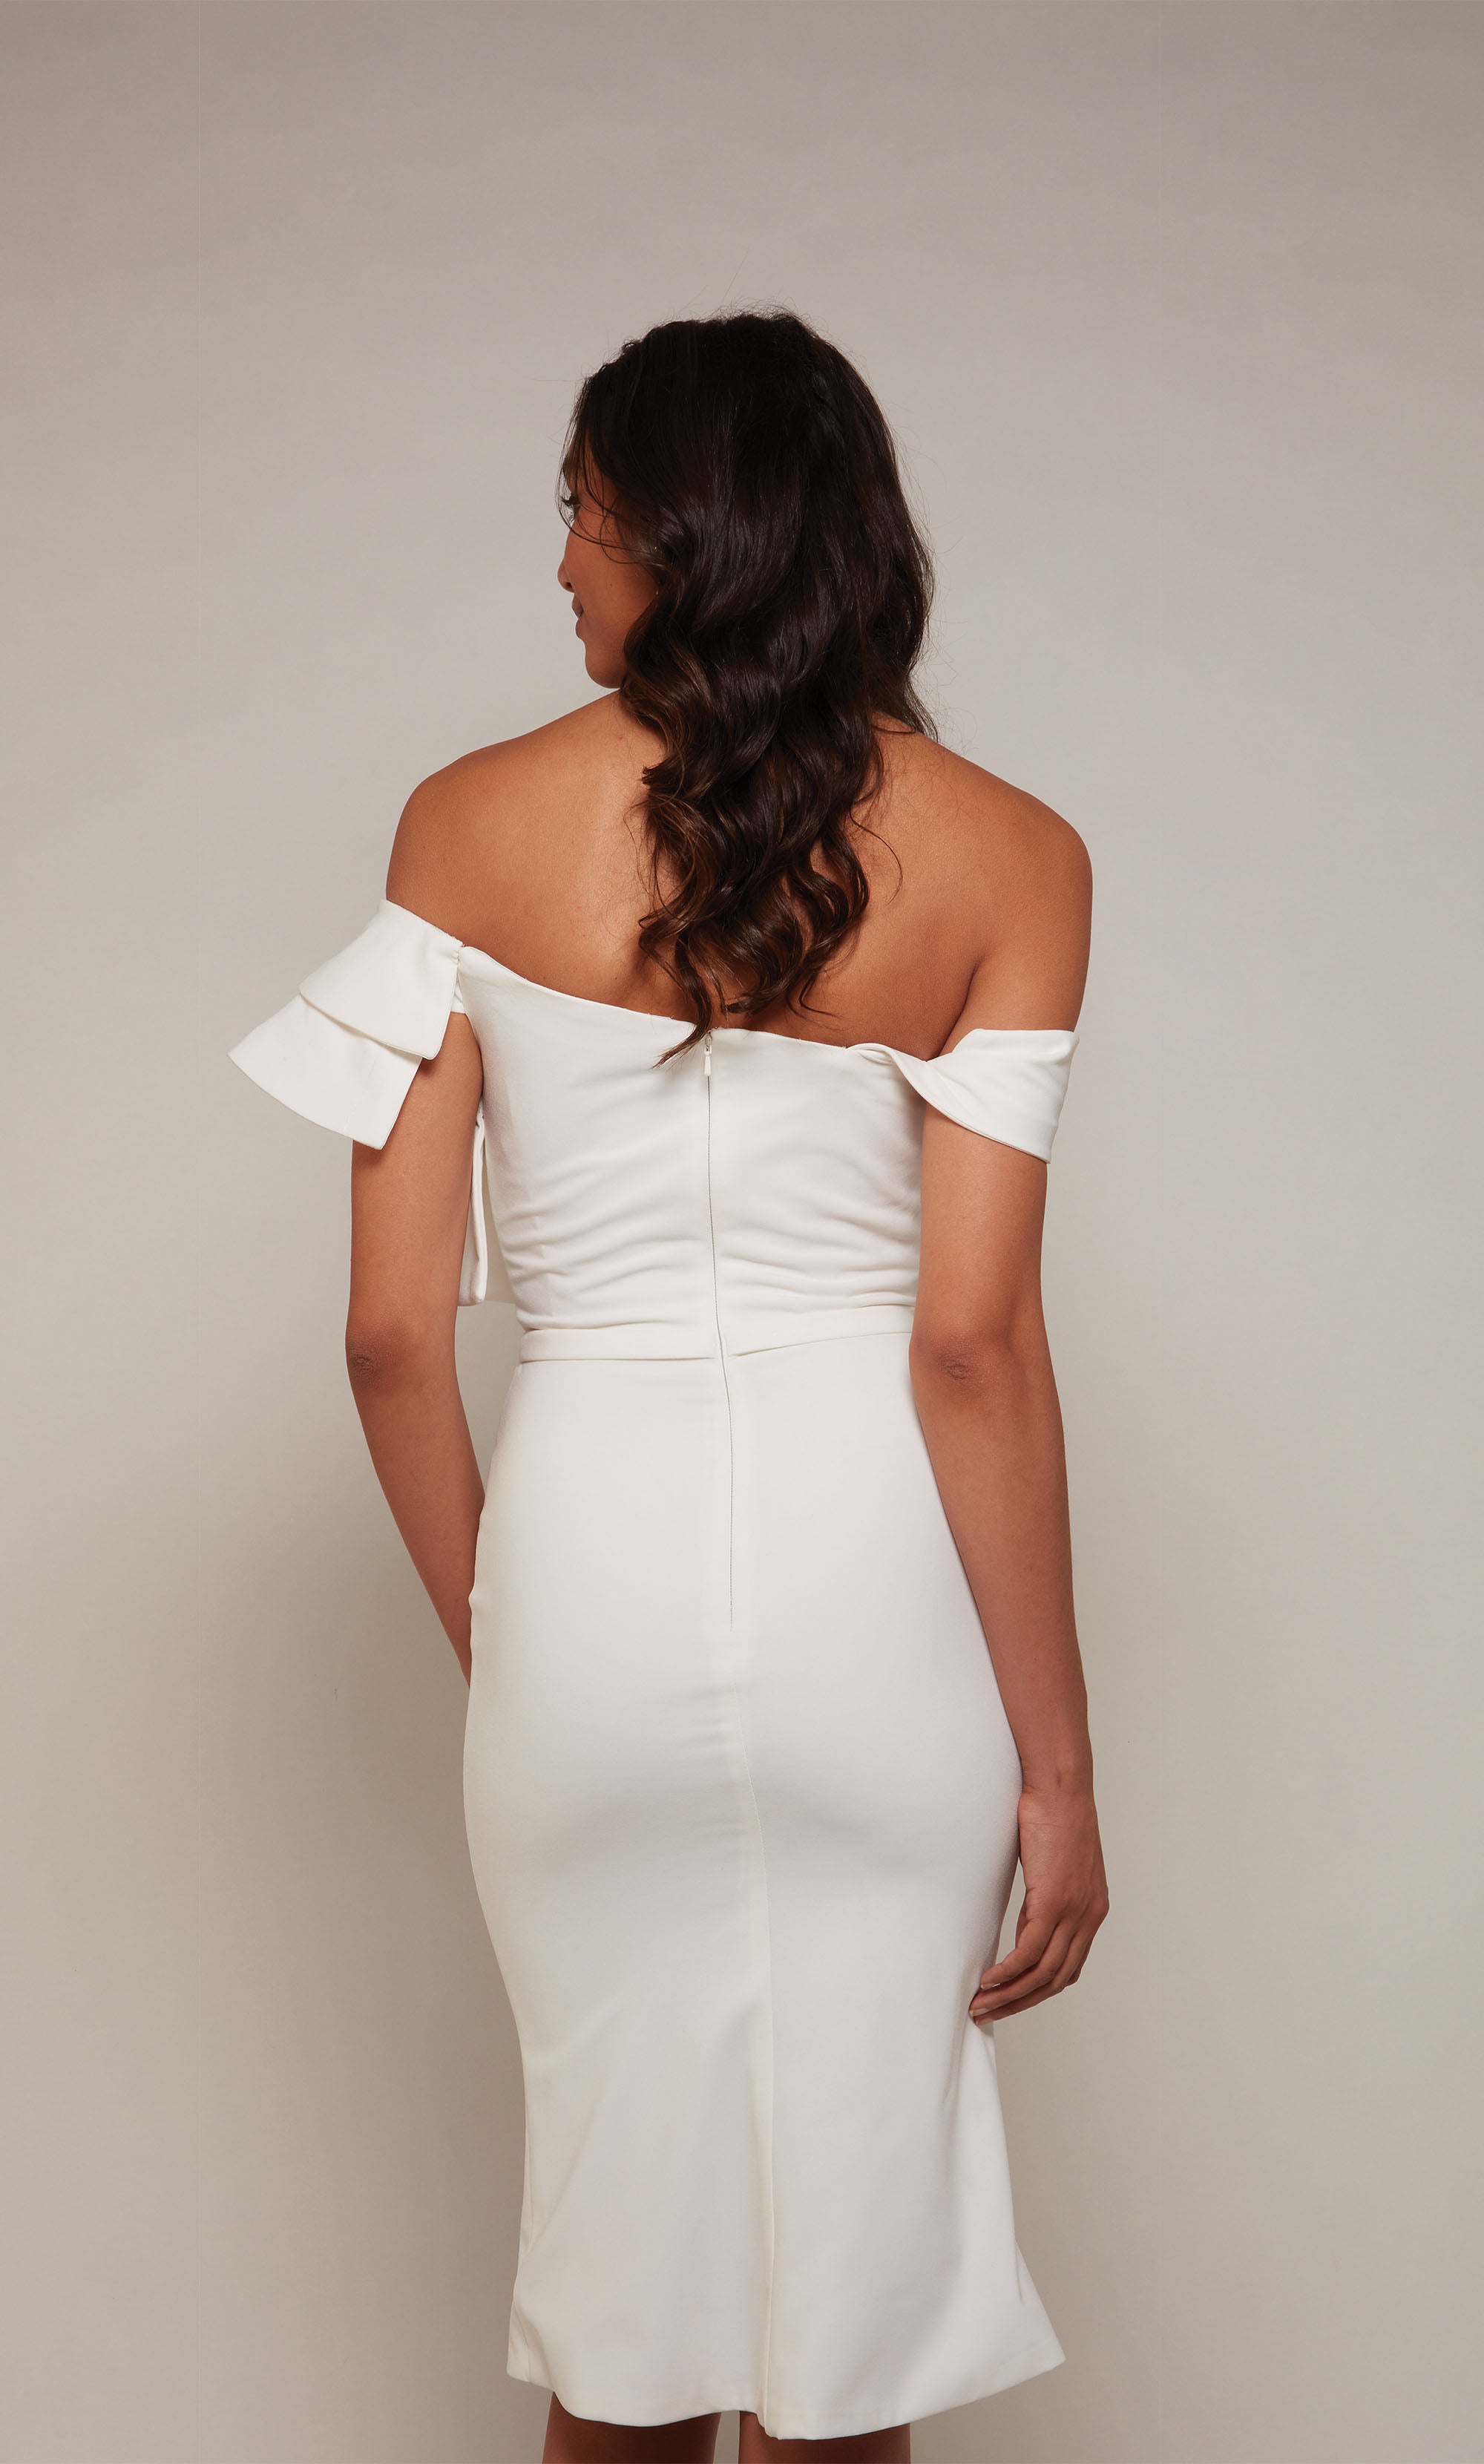 A knee length, white engagement dress with a ruffled off the shoulder neckline and faux belt at the natural waistline.